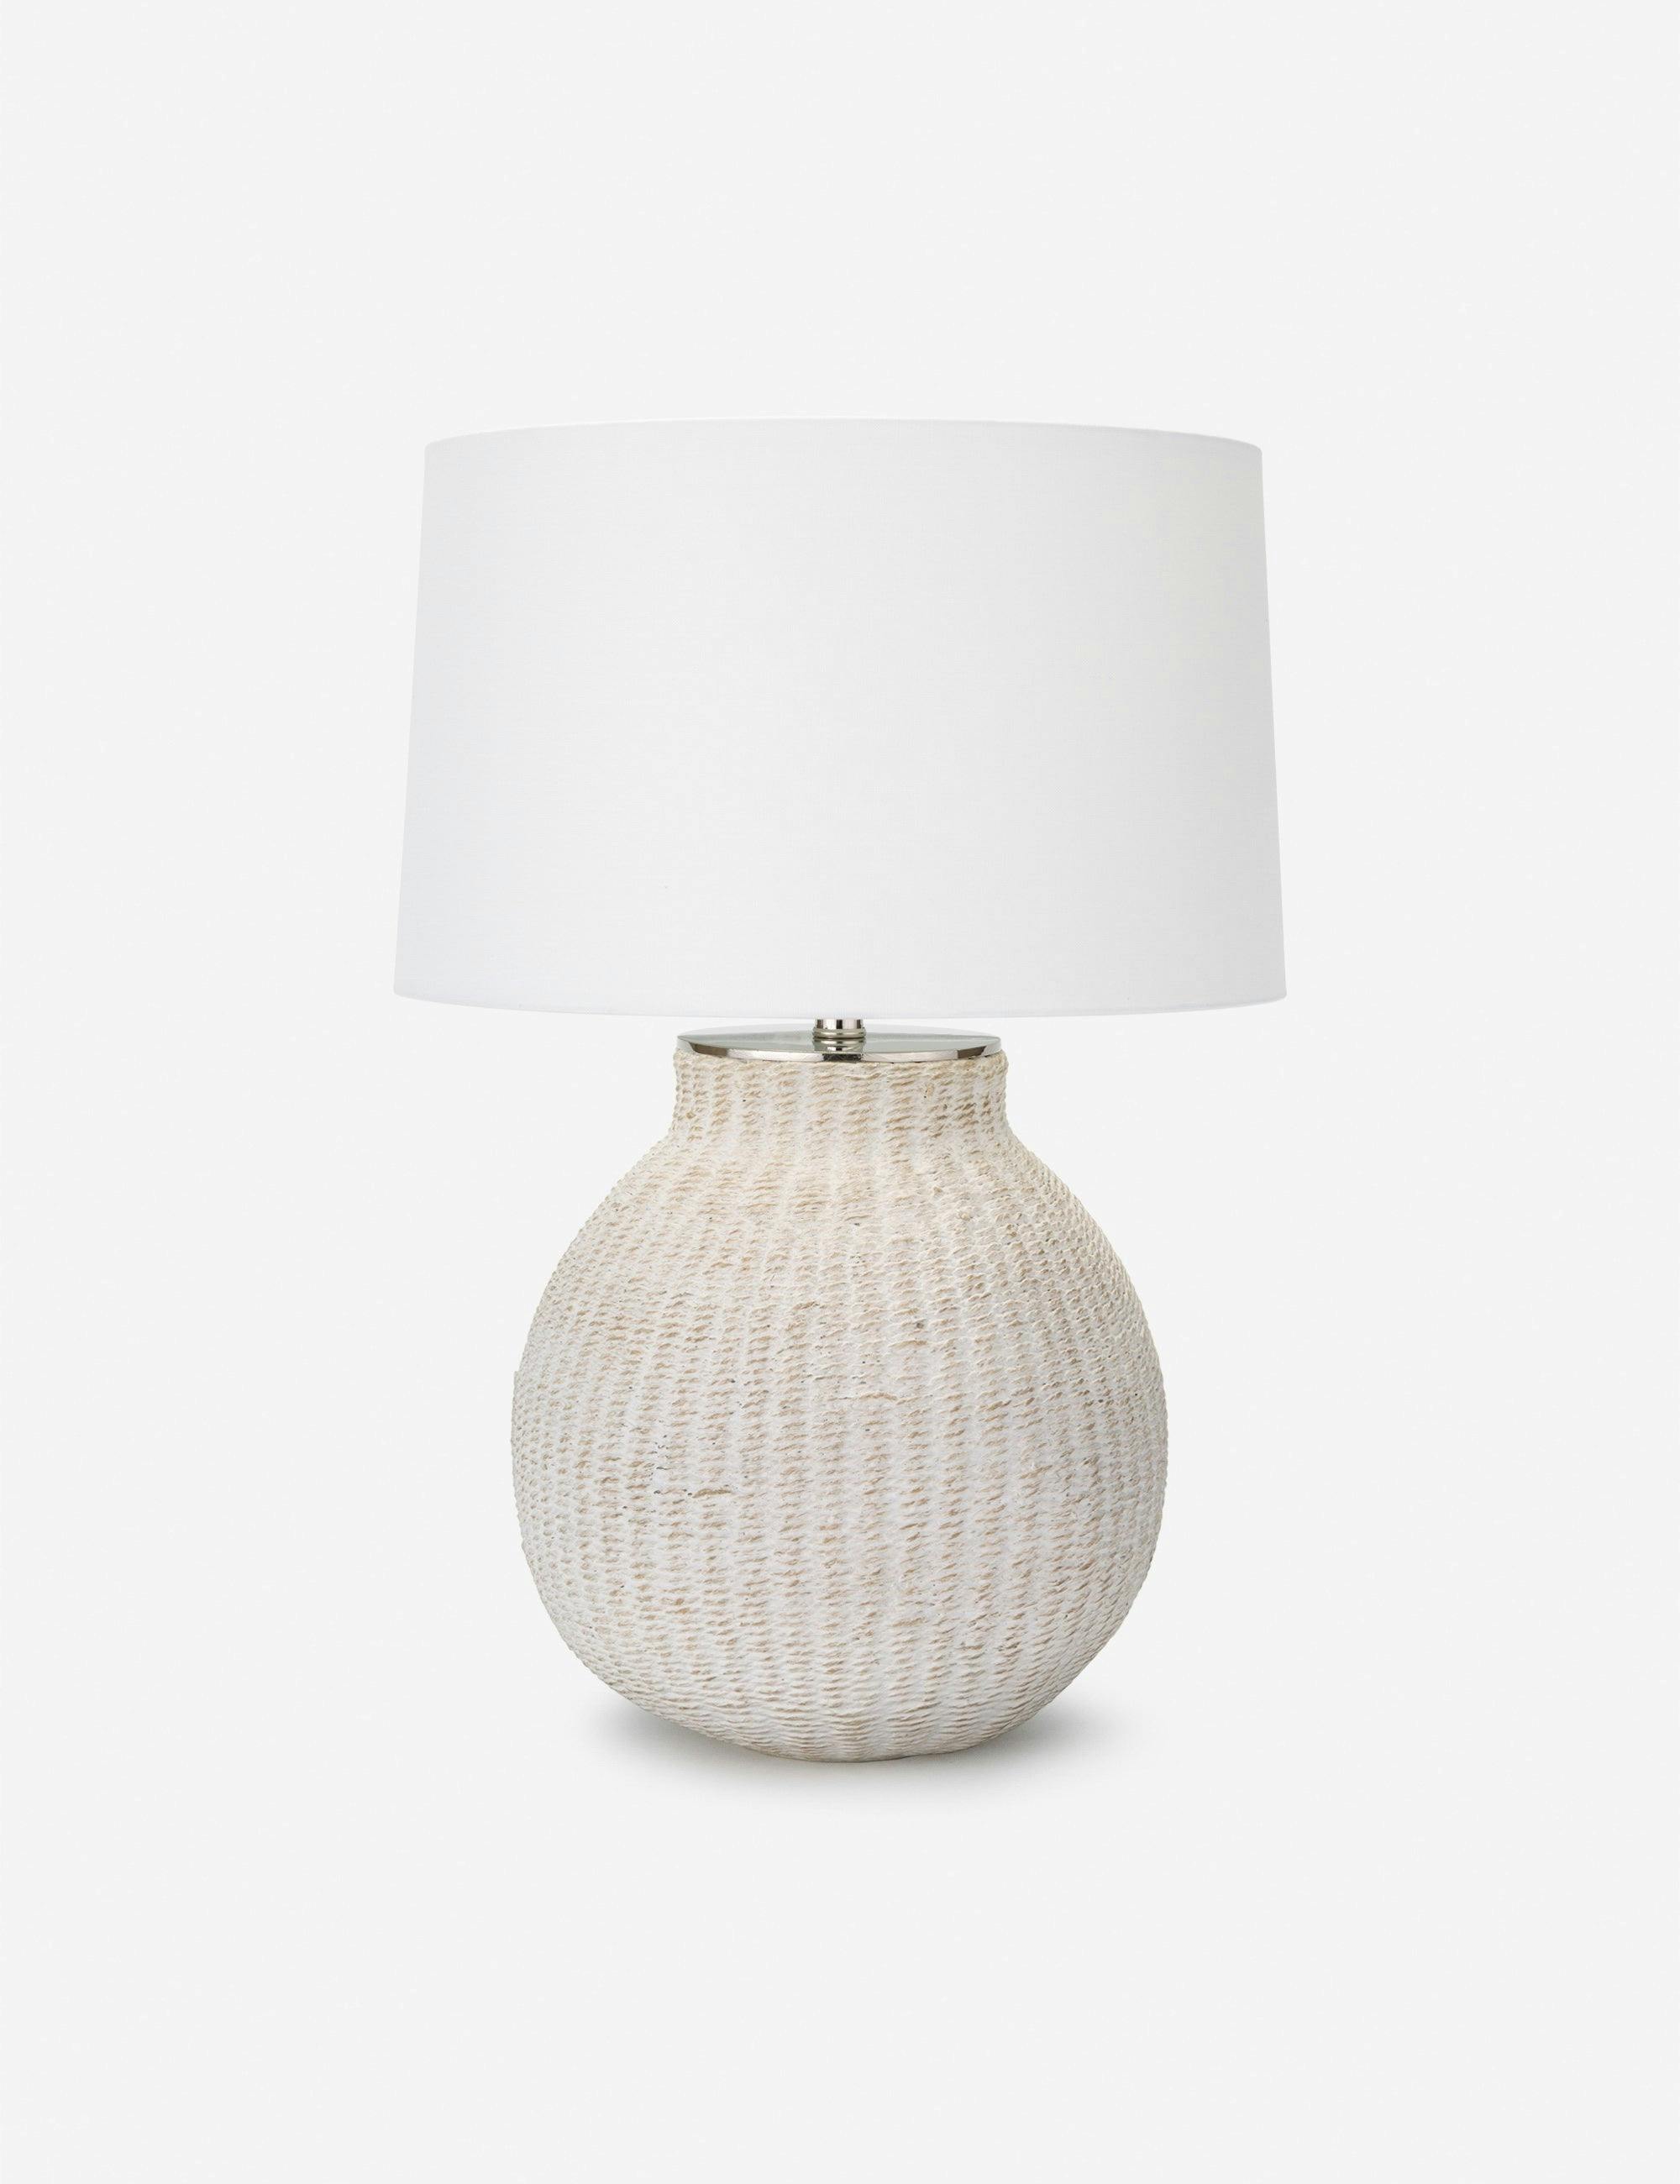 Hobi Matte White Linen-Shade Table Lamp with Polished Nickel Accents